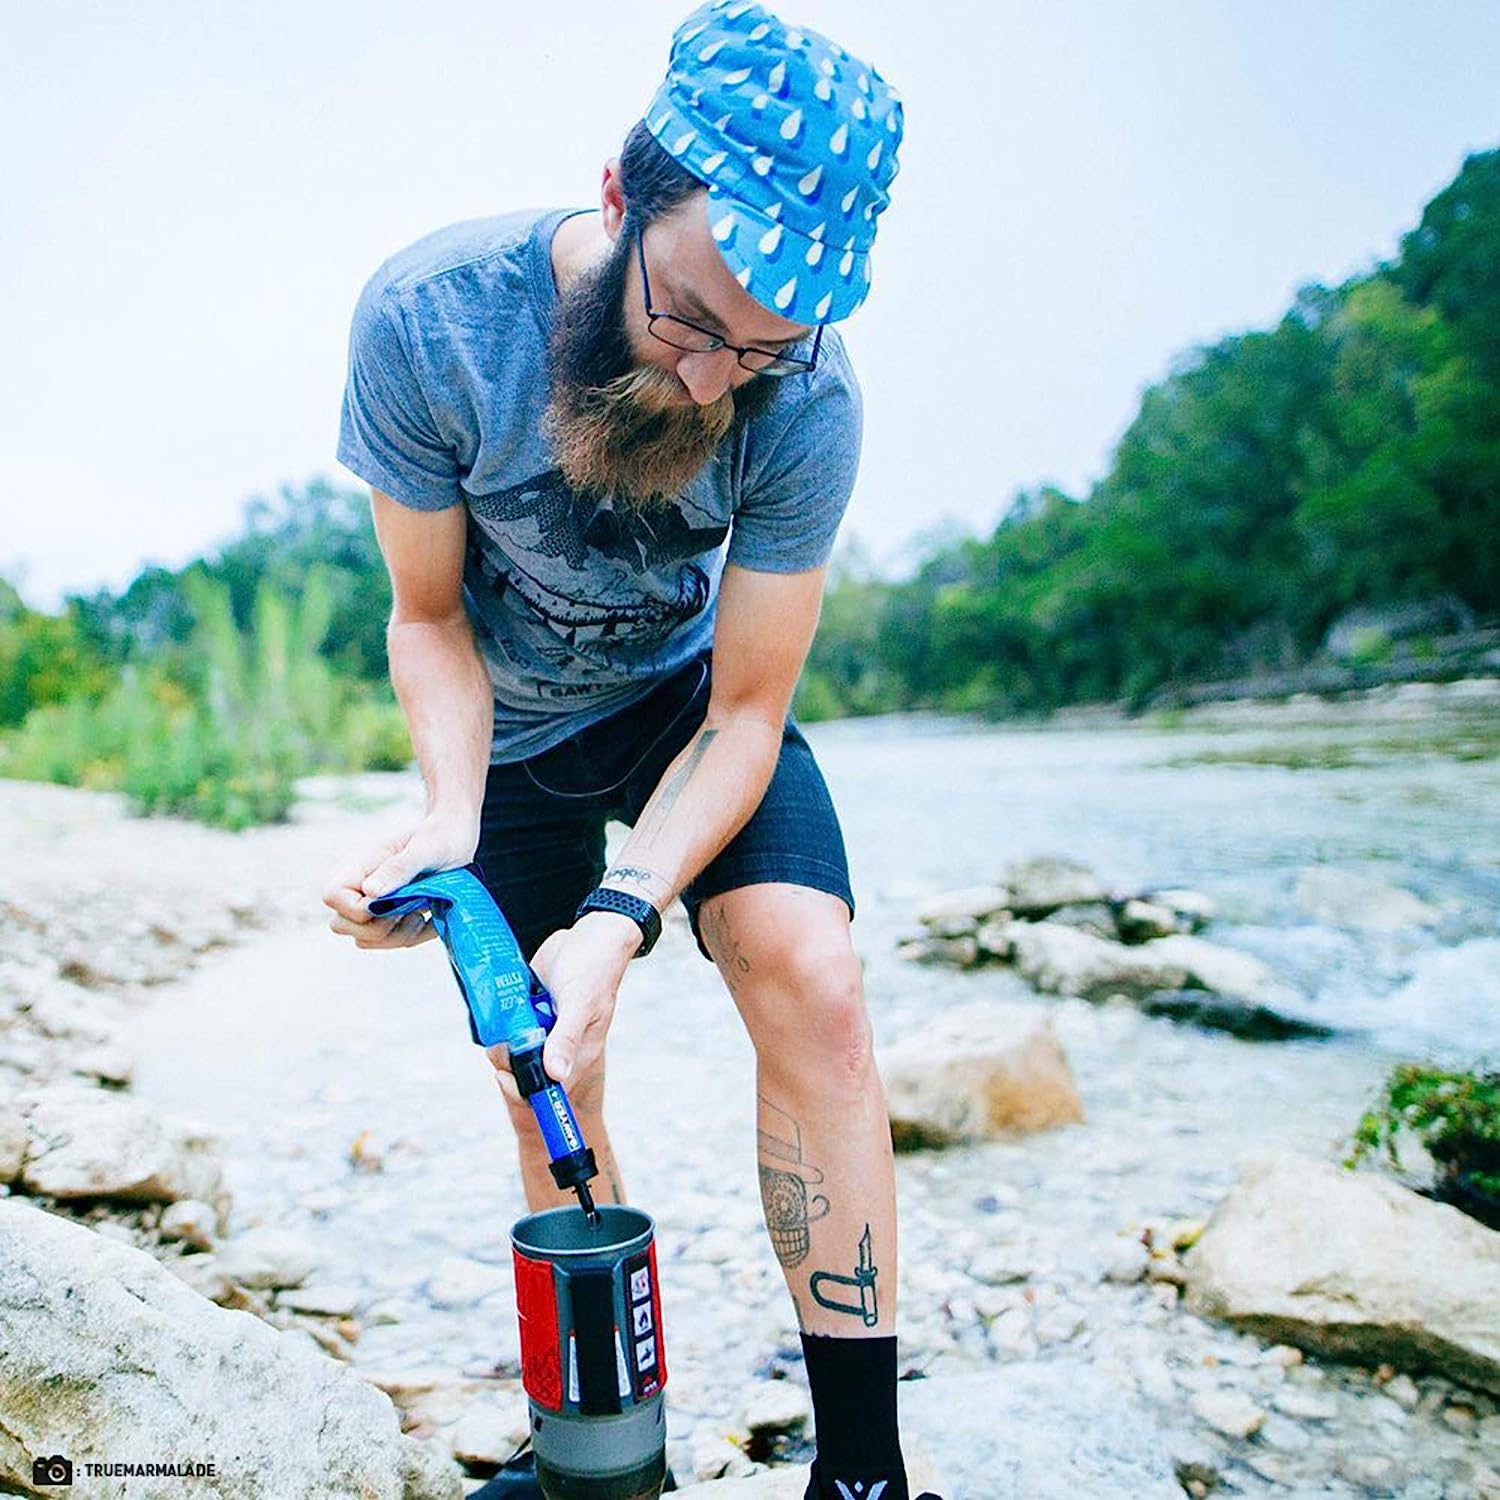 A person using a Portable Water Filter to purify water from a natural source.